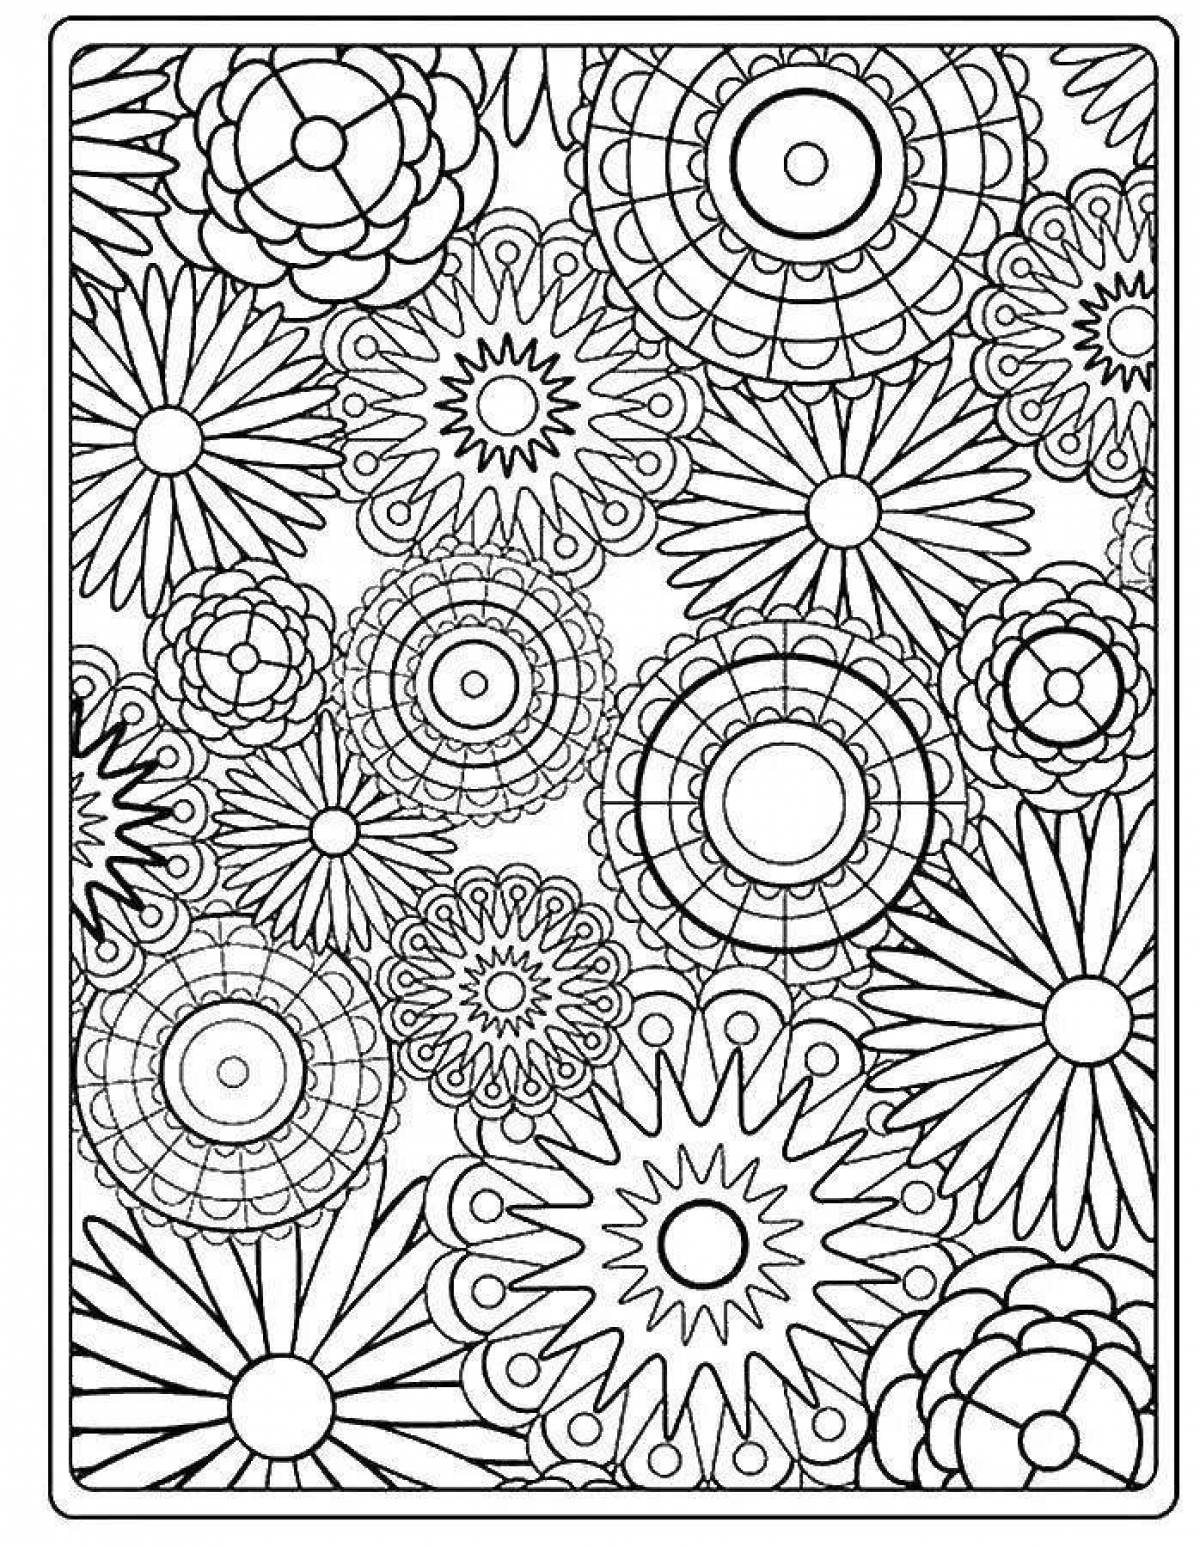 Playful coloring color therapy